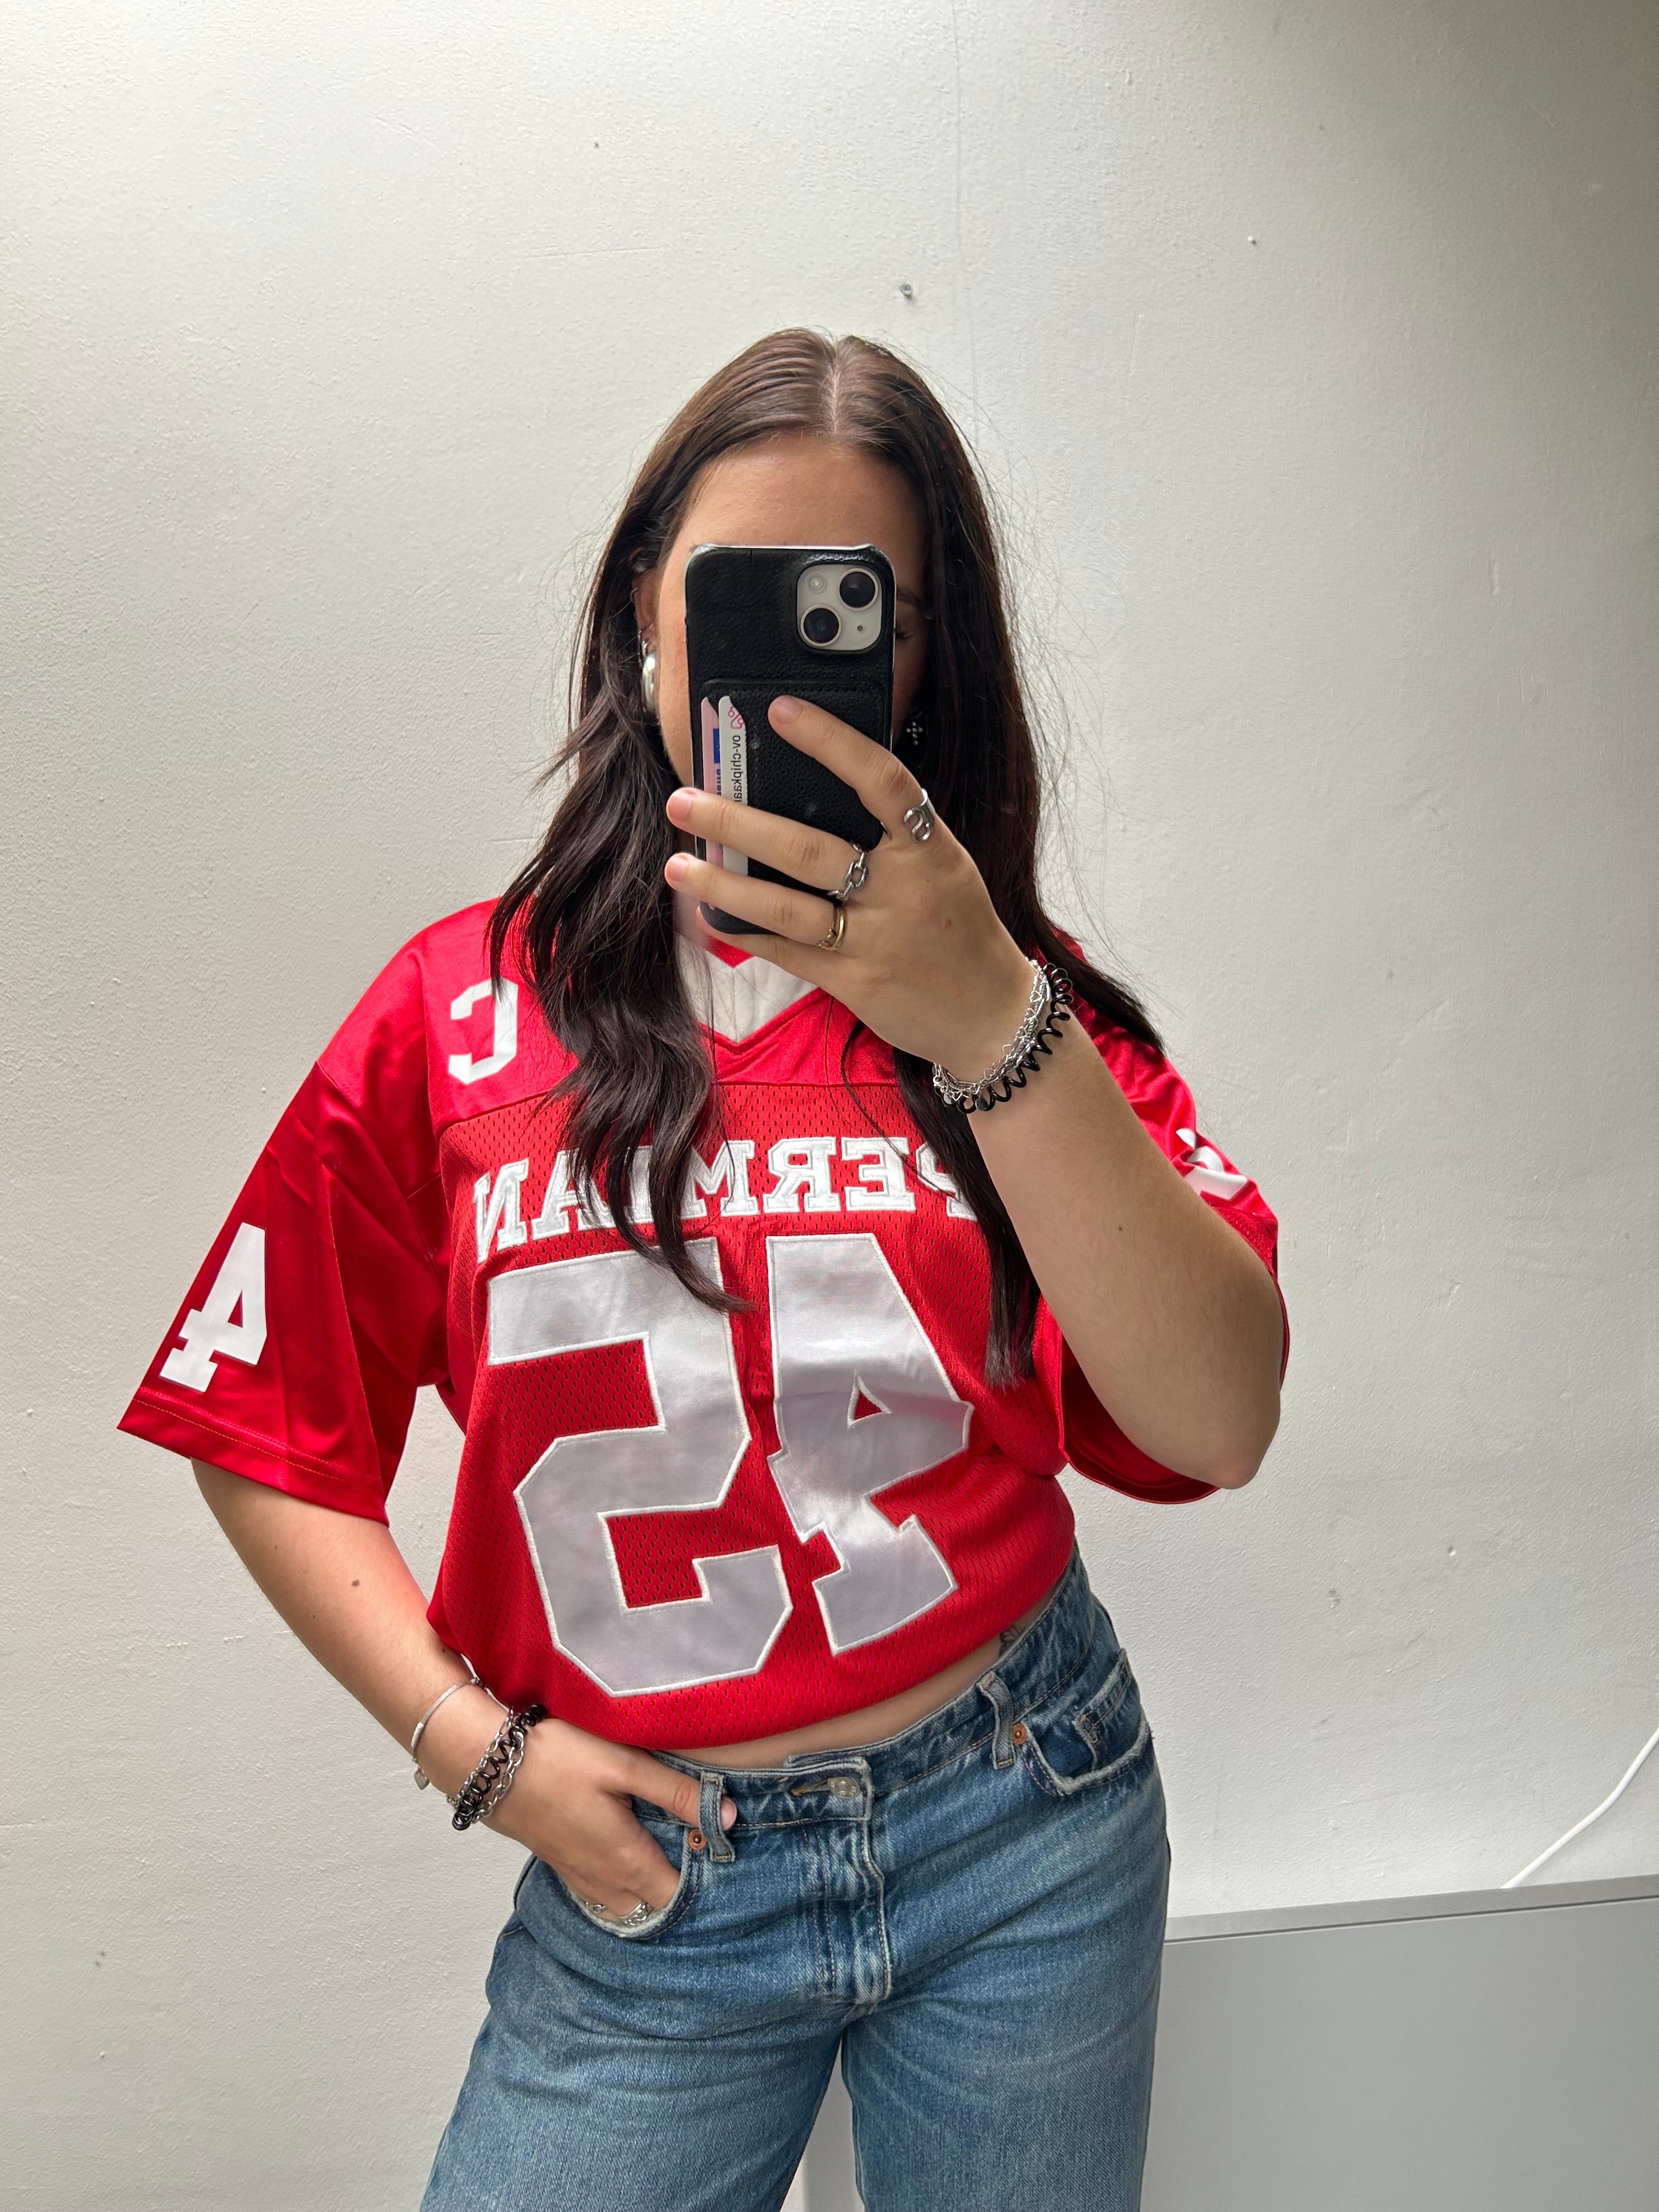 Jersey 45 Red - 